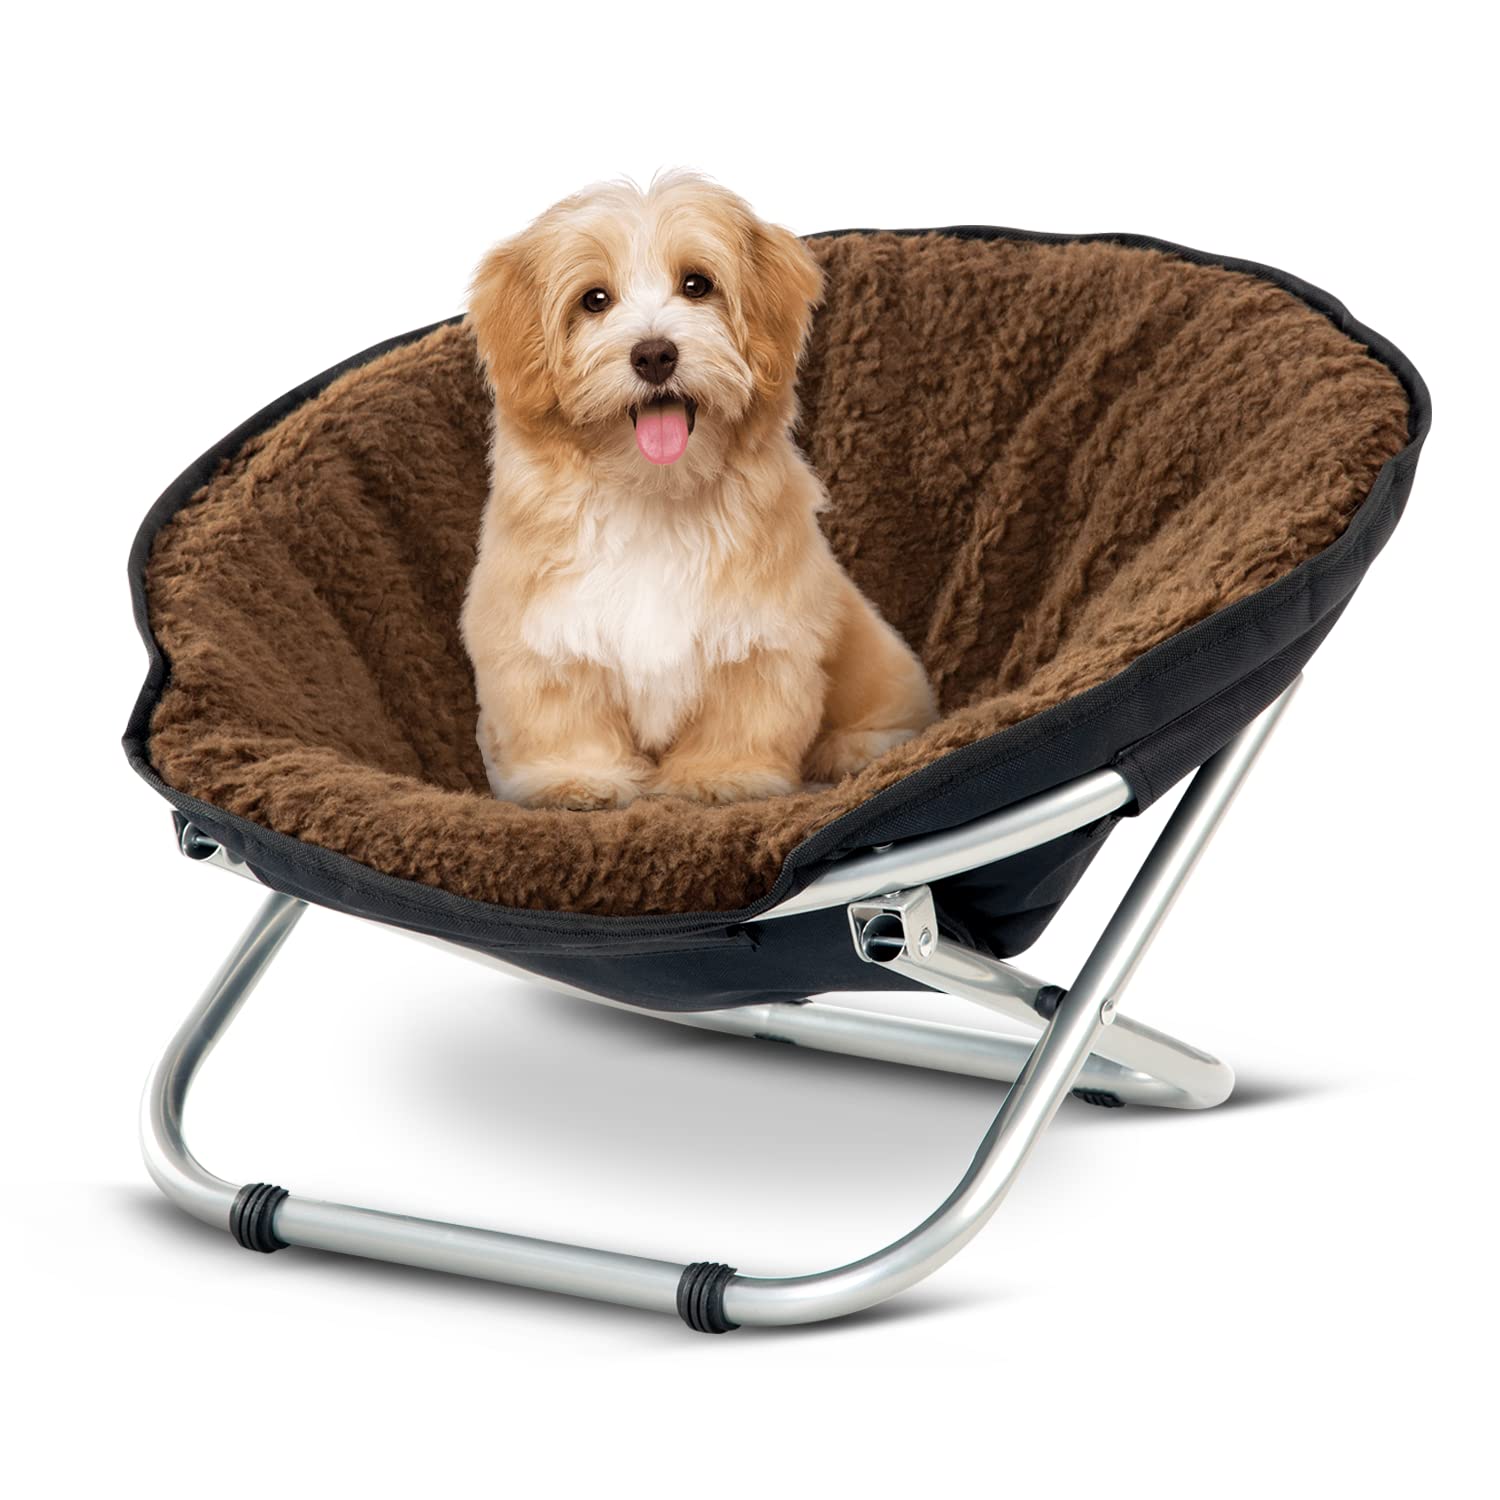 Bundaloo Elevated Dog & Cat Bed - Round Foldable Folding Pet Cot, Portable Seat Cushion with Removable & Washable Cover - for Small to Medium-Sized Pets - 30lbs Maximum Weight Capacity - 21" Wx15 H  - Like New